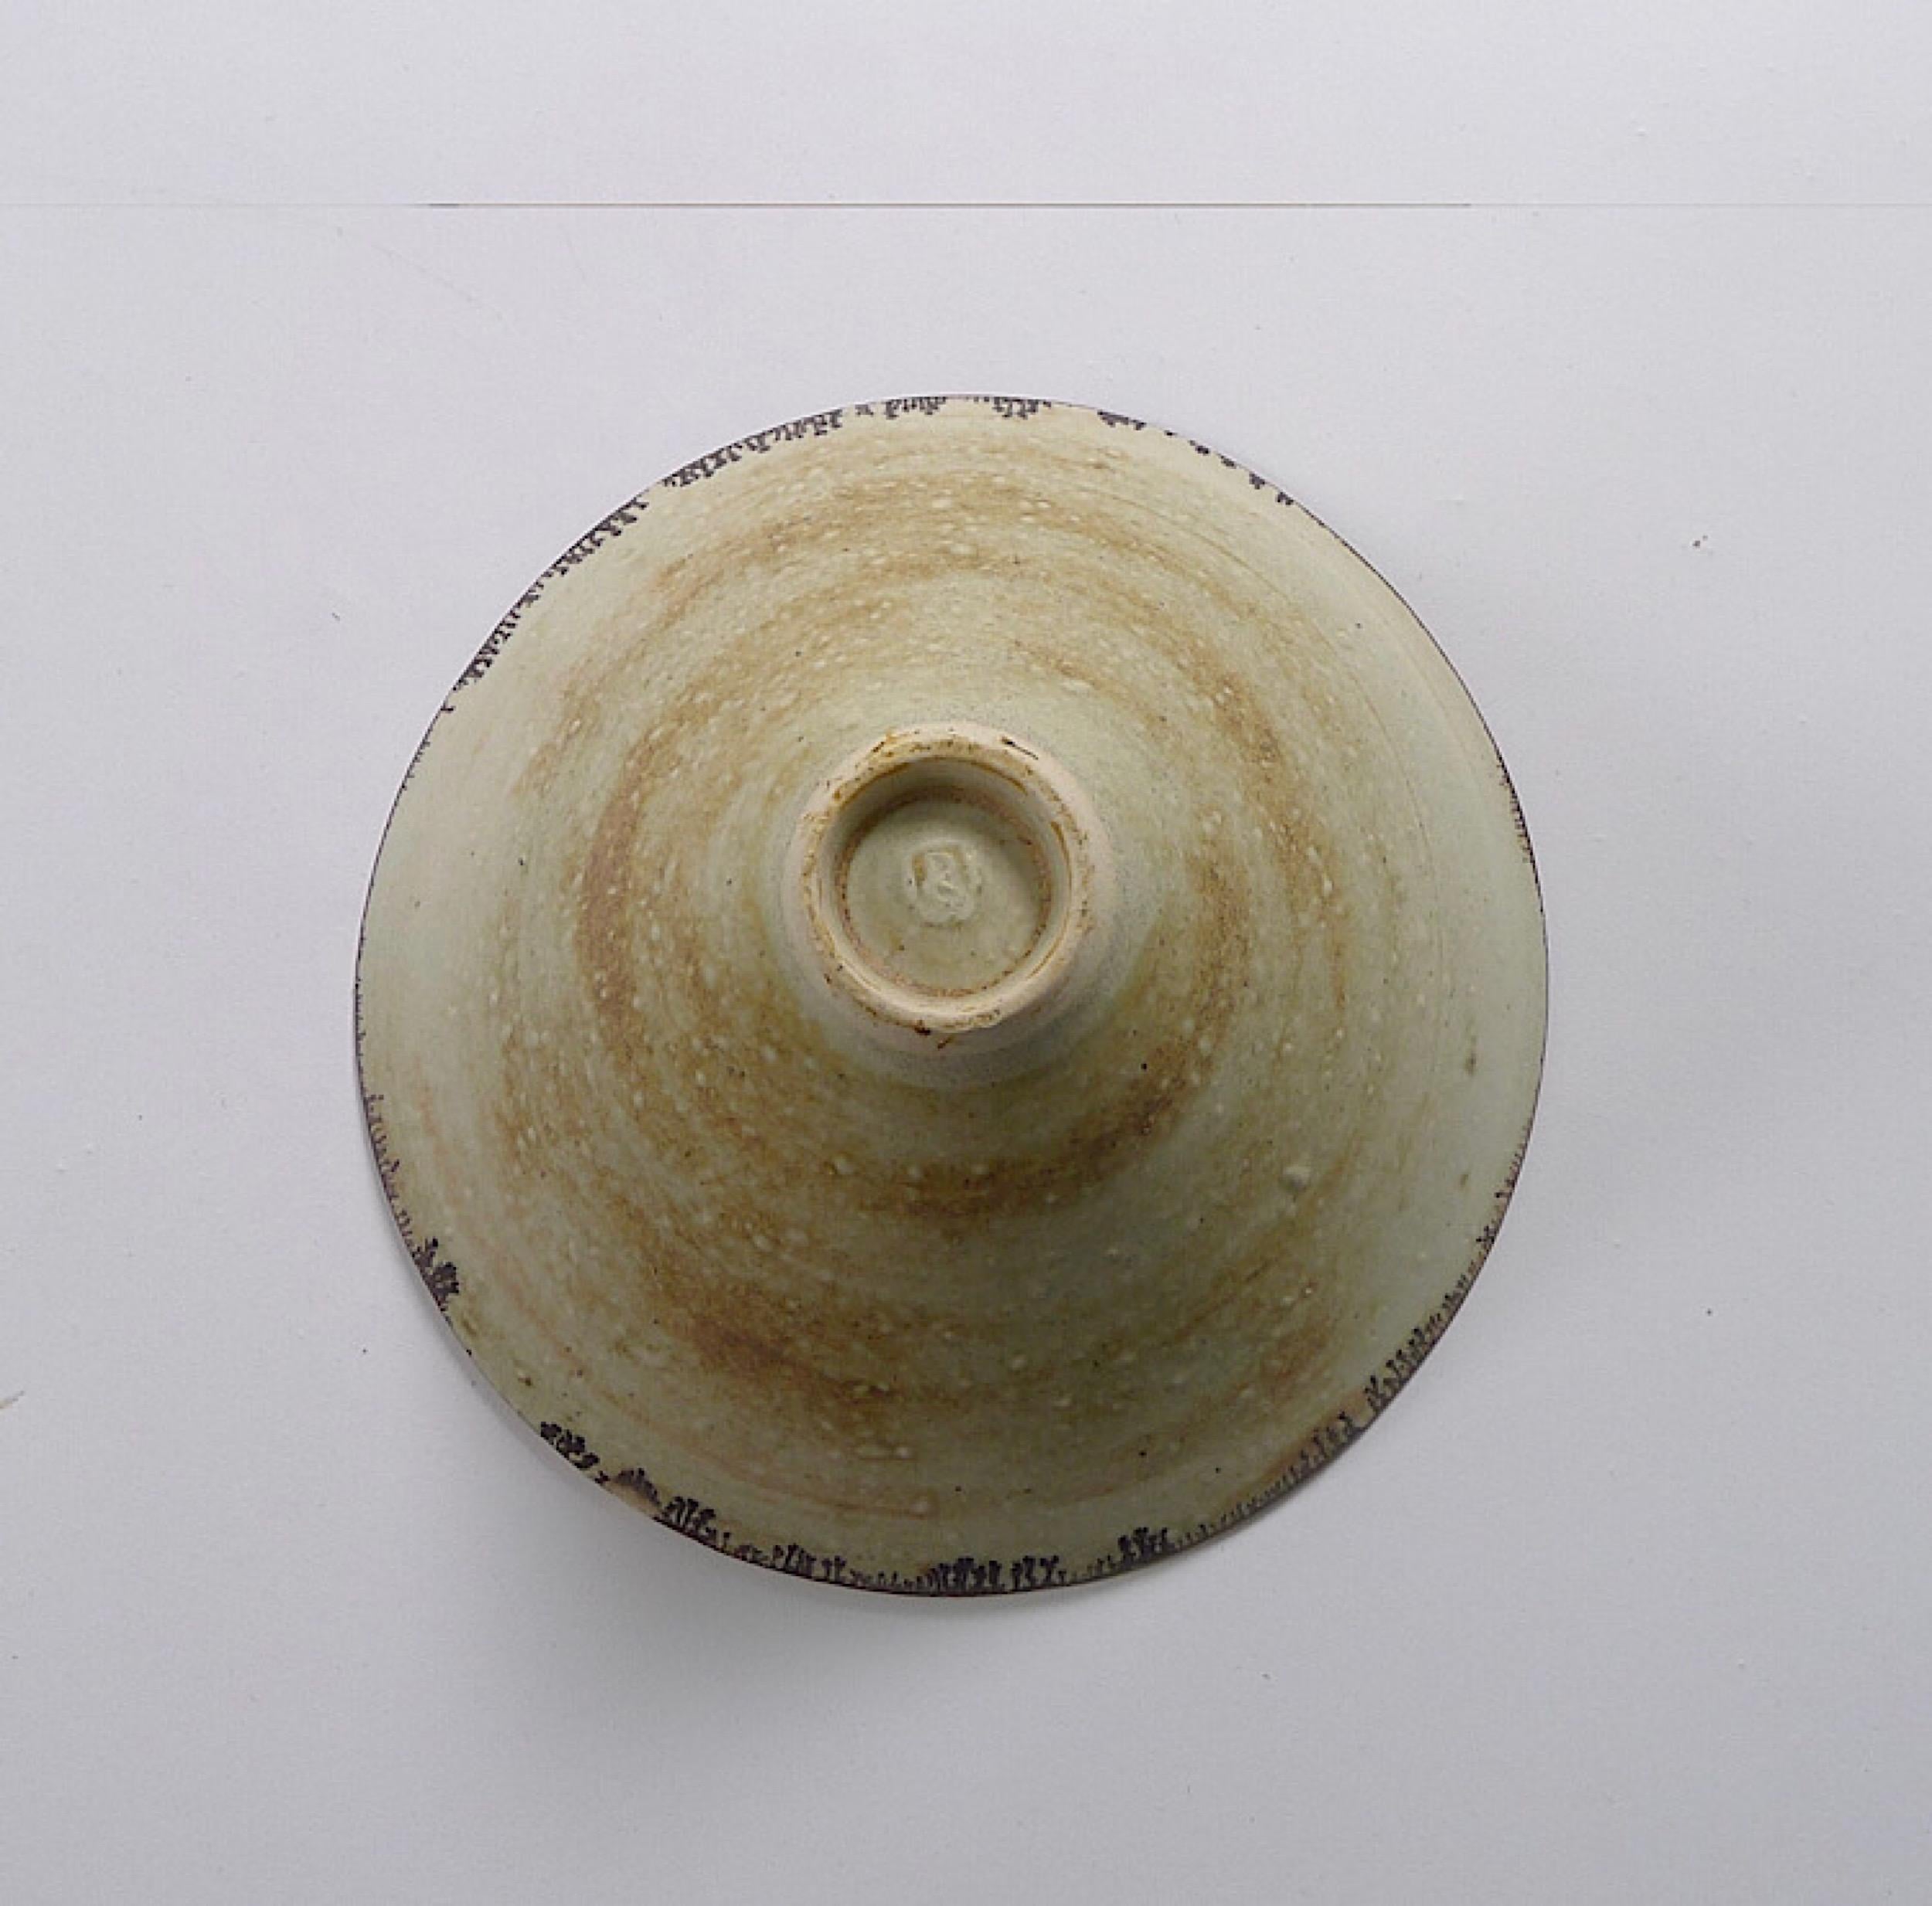 Lucie Rie, Porcelain Bowl, Flaring Conical Form, Impressed Seal Mark 3